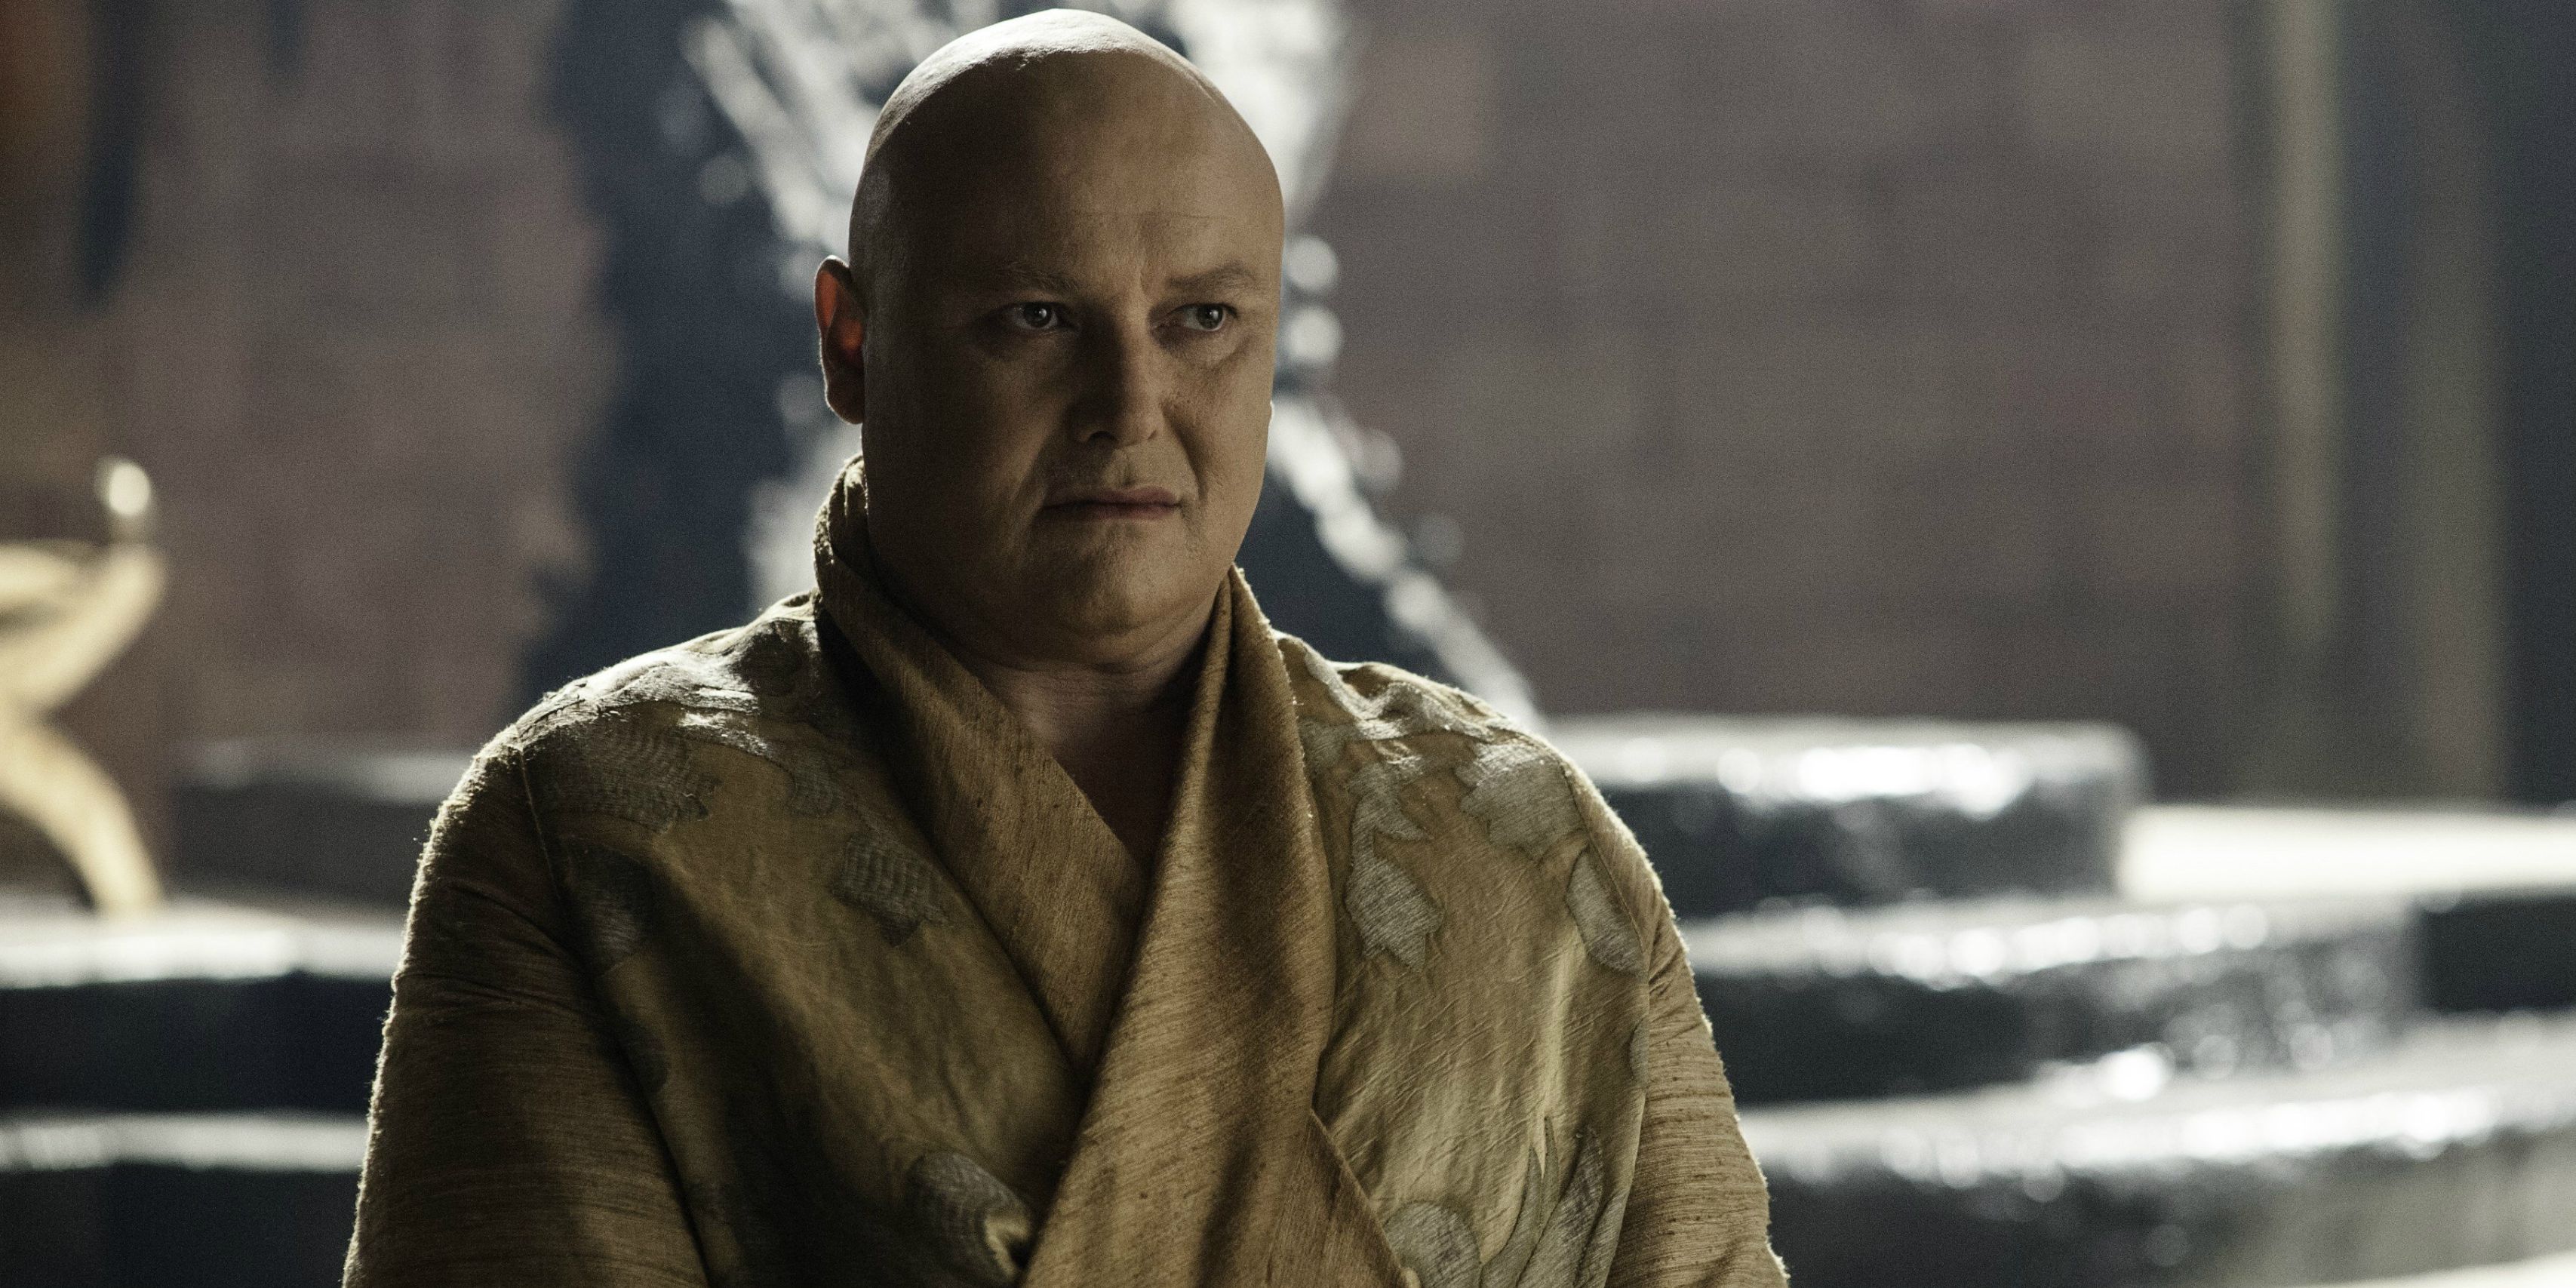 Varys at the Throne room in Game of Thrones.